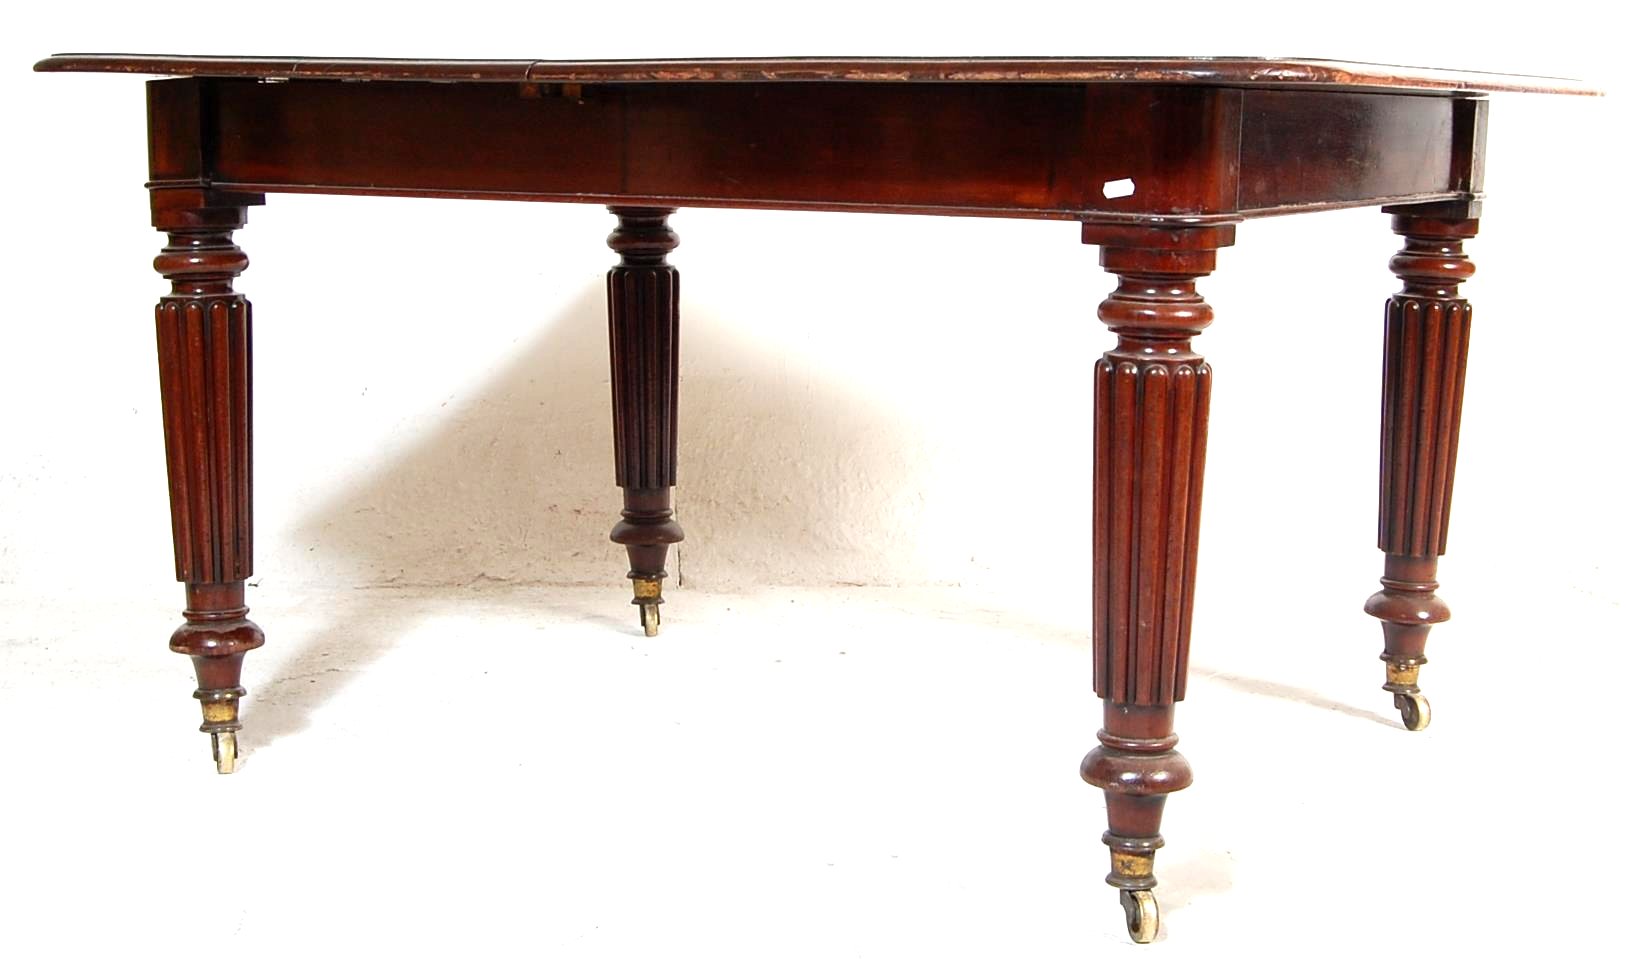 19TH CENTURY VICTORIAN SOLID MAHOGANY DINING TABLE